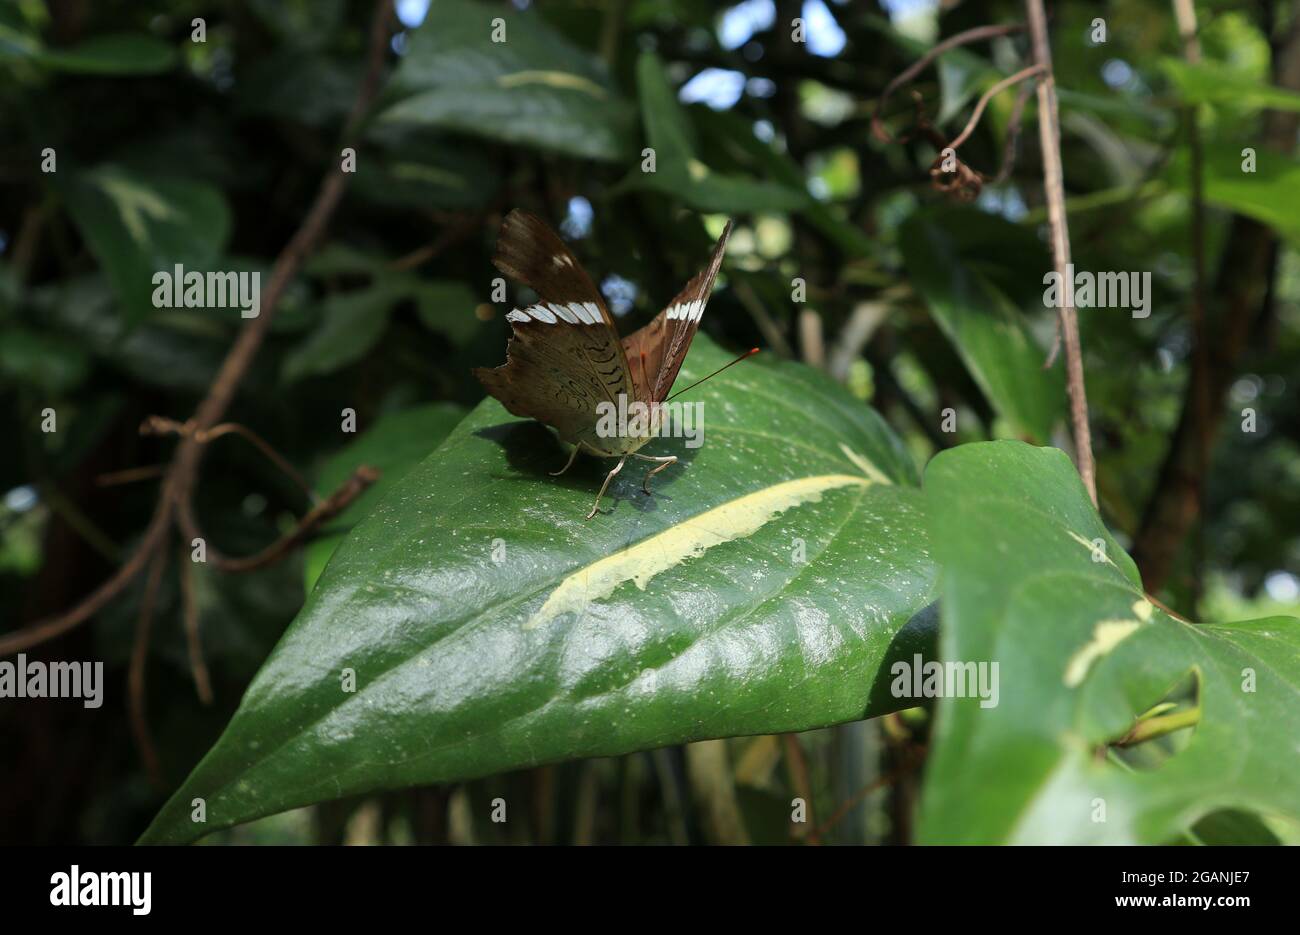 A frightened rare brown butterfly with scary eyes and posture, ready to fly from the Nagavalli leaf also named as Piper Betel Stock Photo